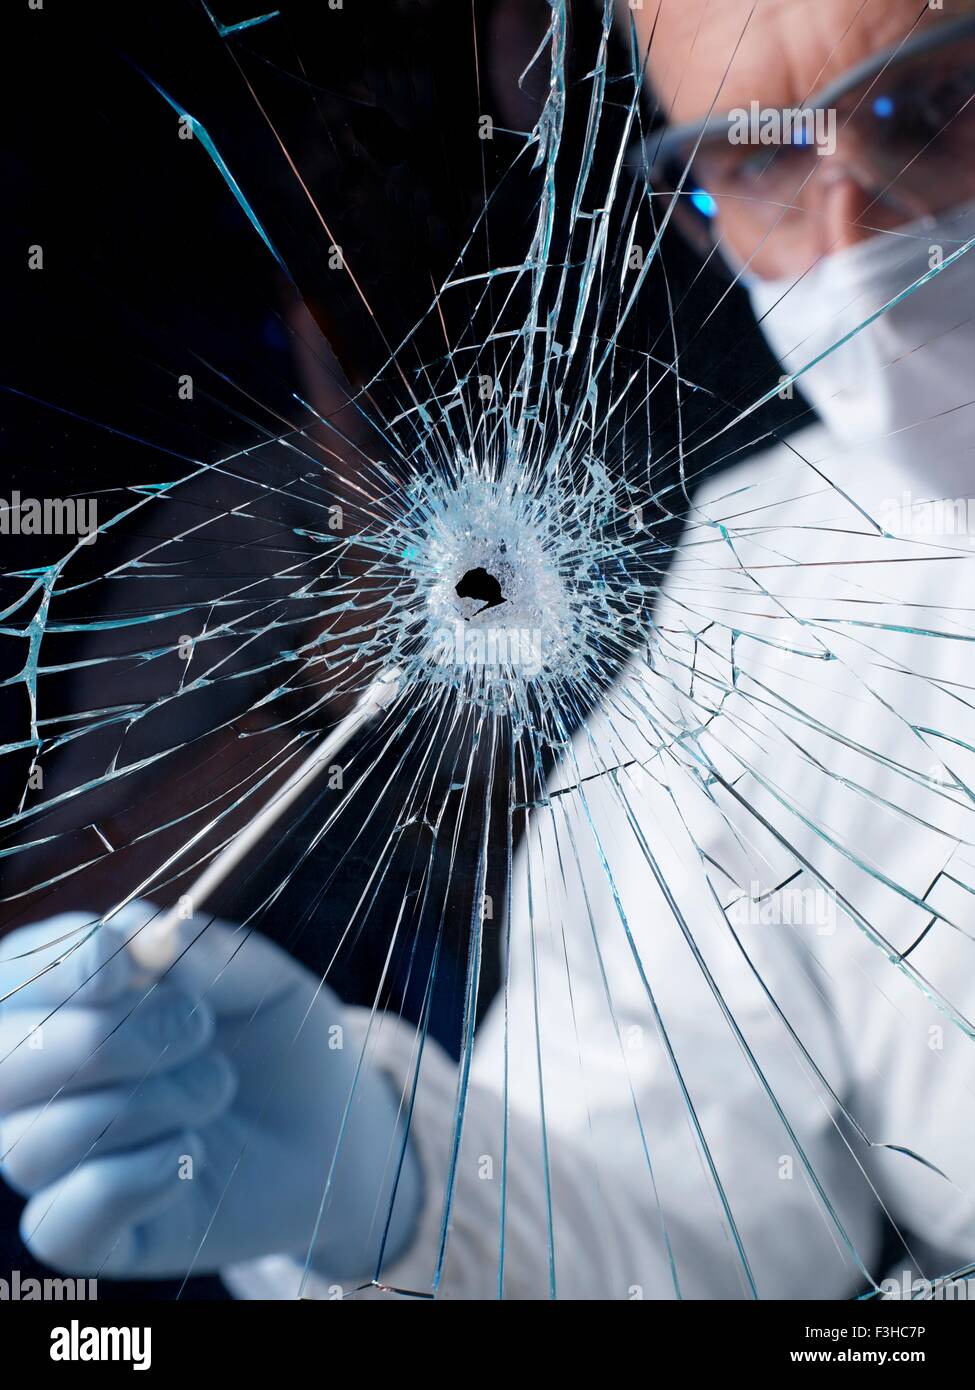 Forensics officer using swab to collect evidence from broken window Stock Photo